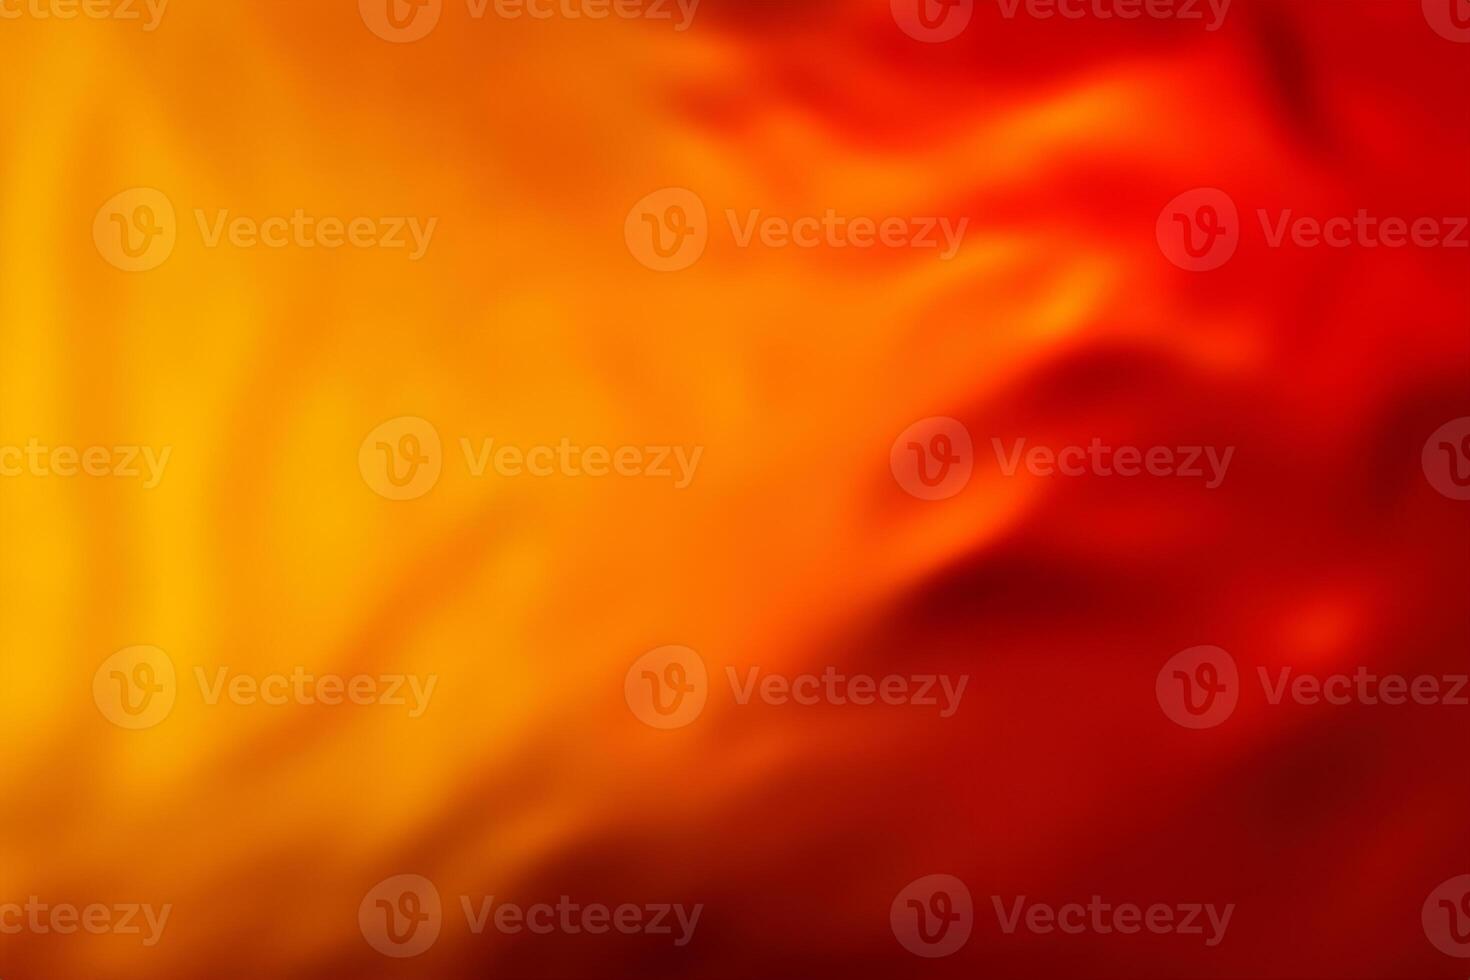 Vibrant Orange Abstract Fusion, Water and Oil Convergence. photo